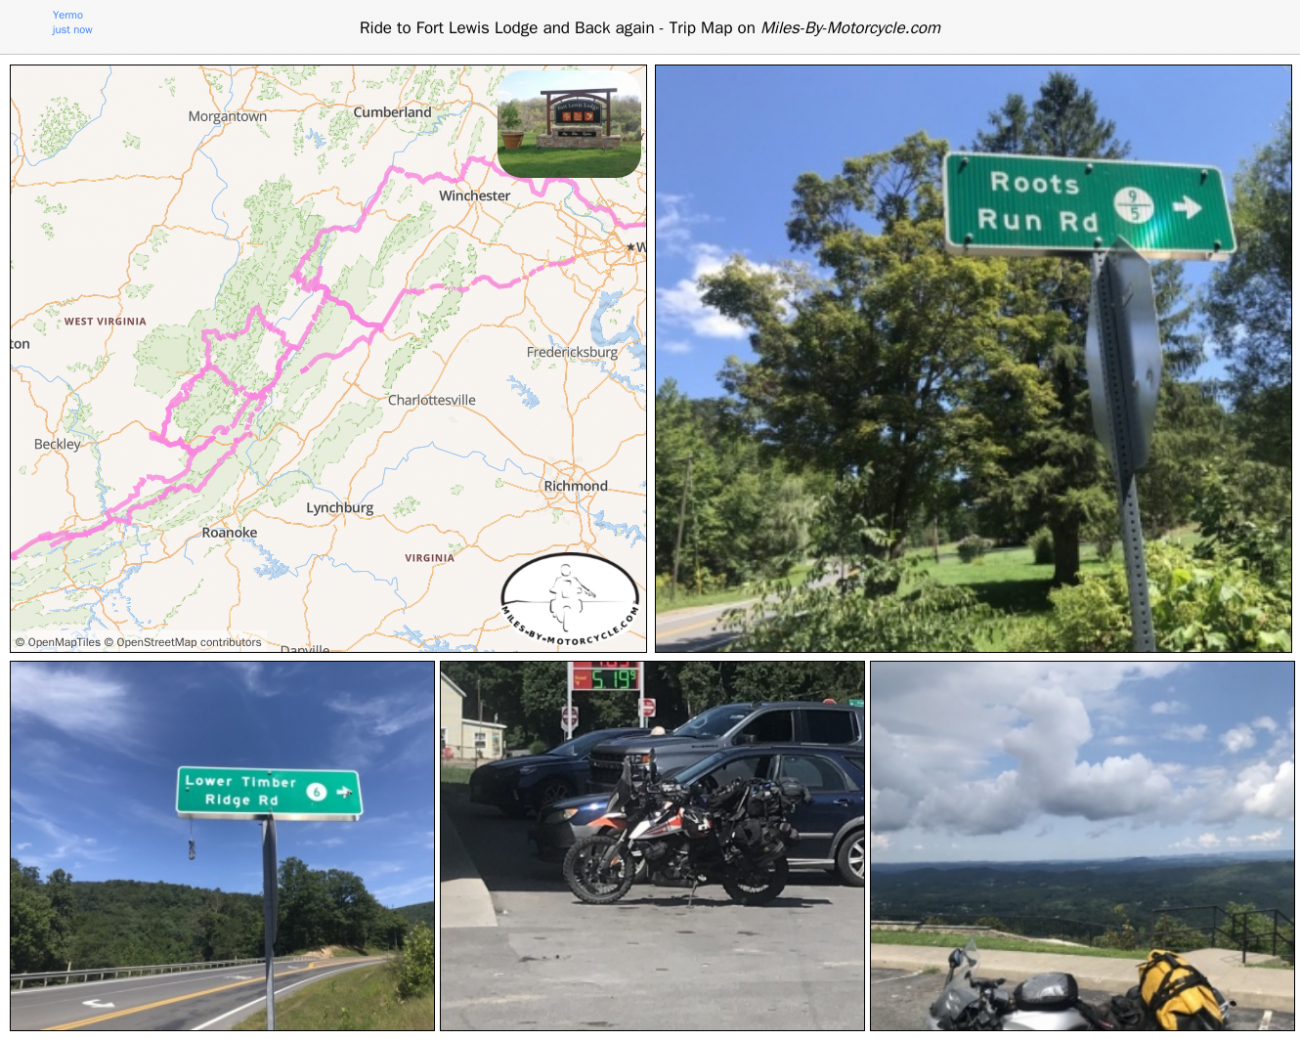 Ride to Fort Lewis Lodge and Back again - Trip Map